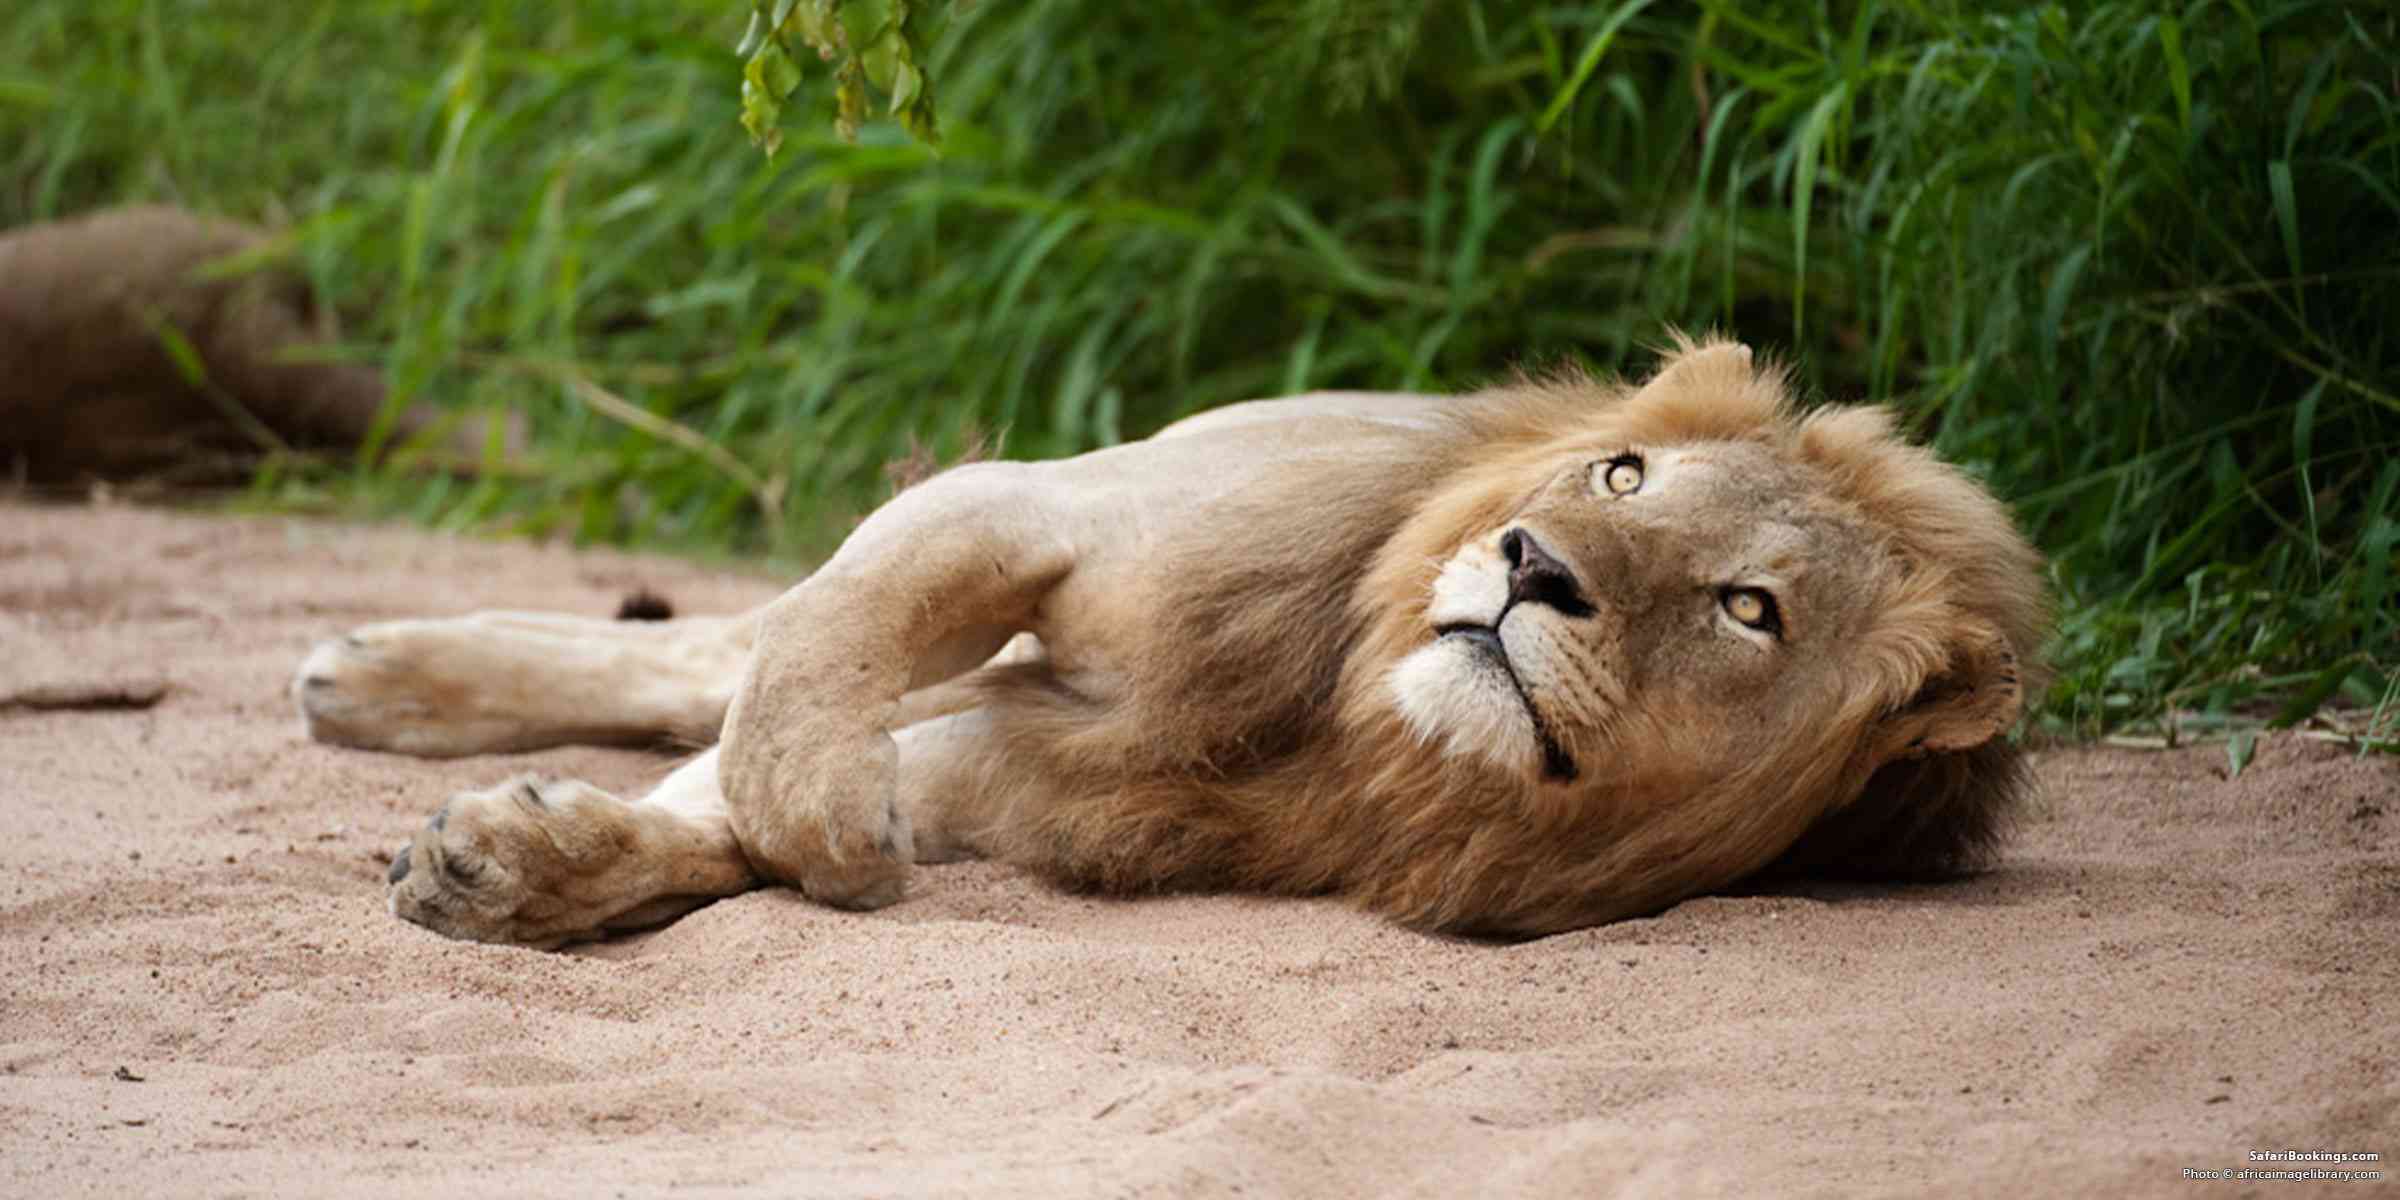 Top 10 Best Places To See Lions in Africa